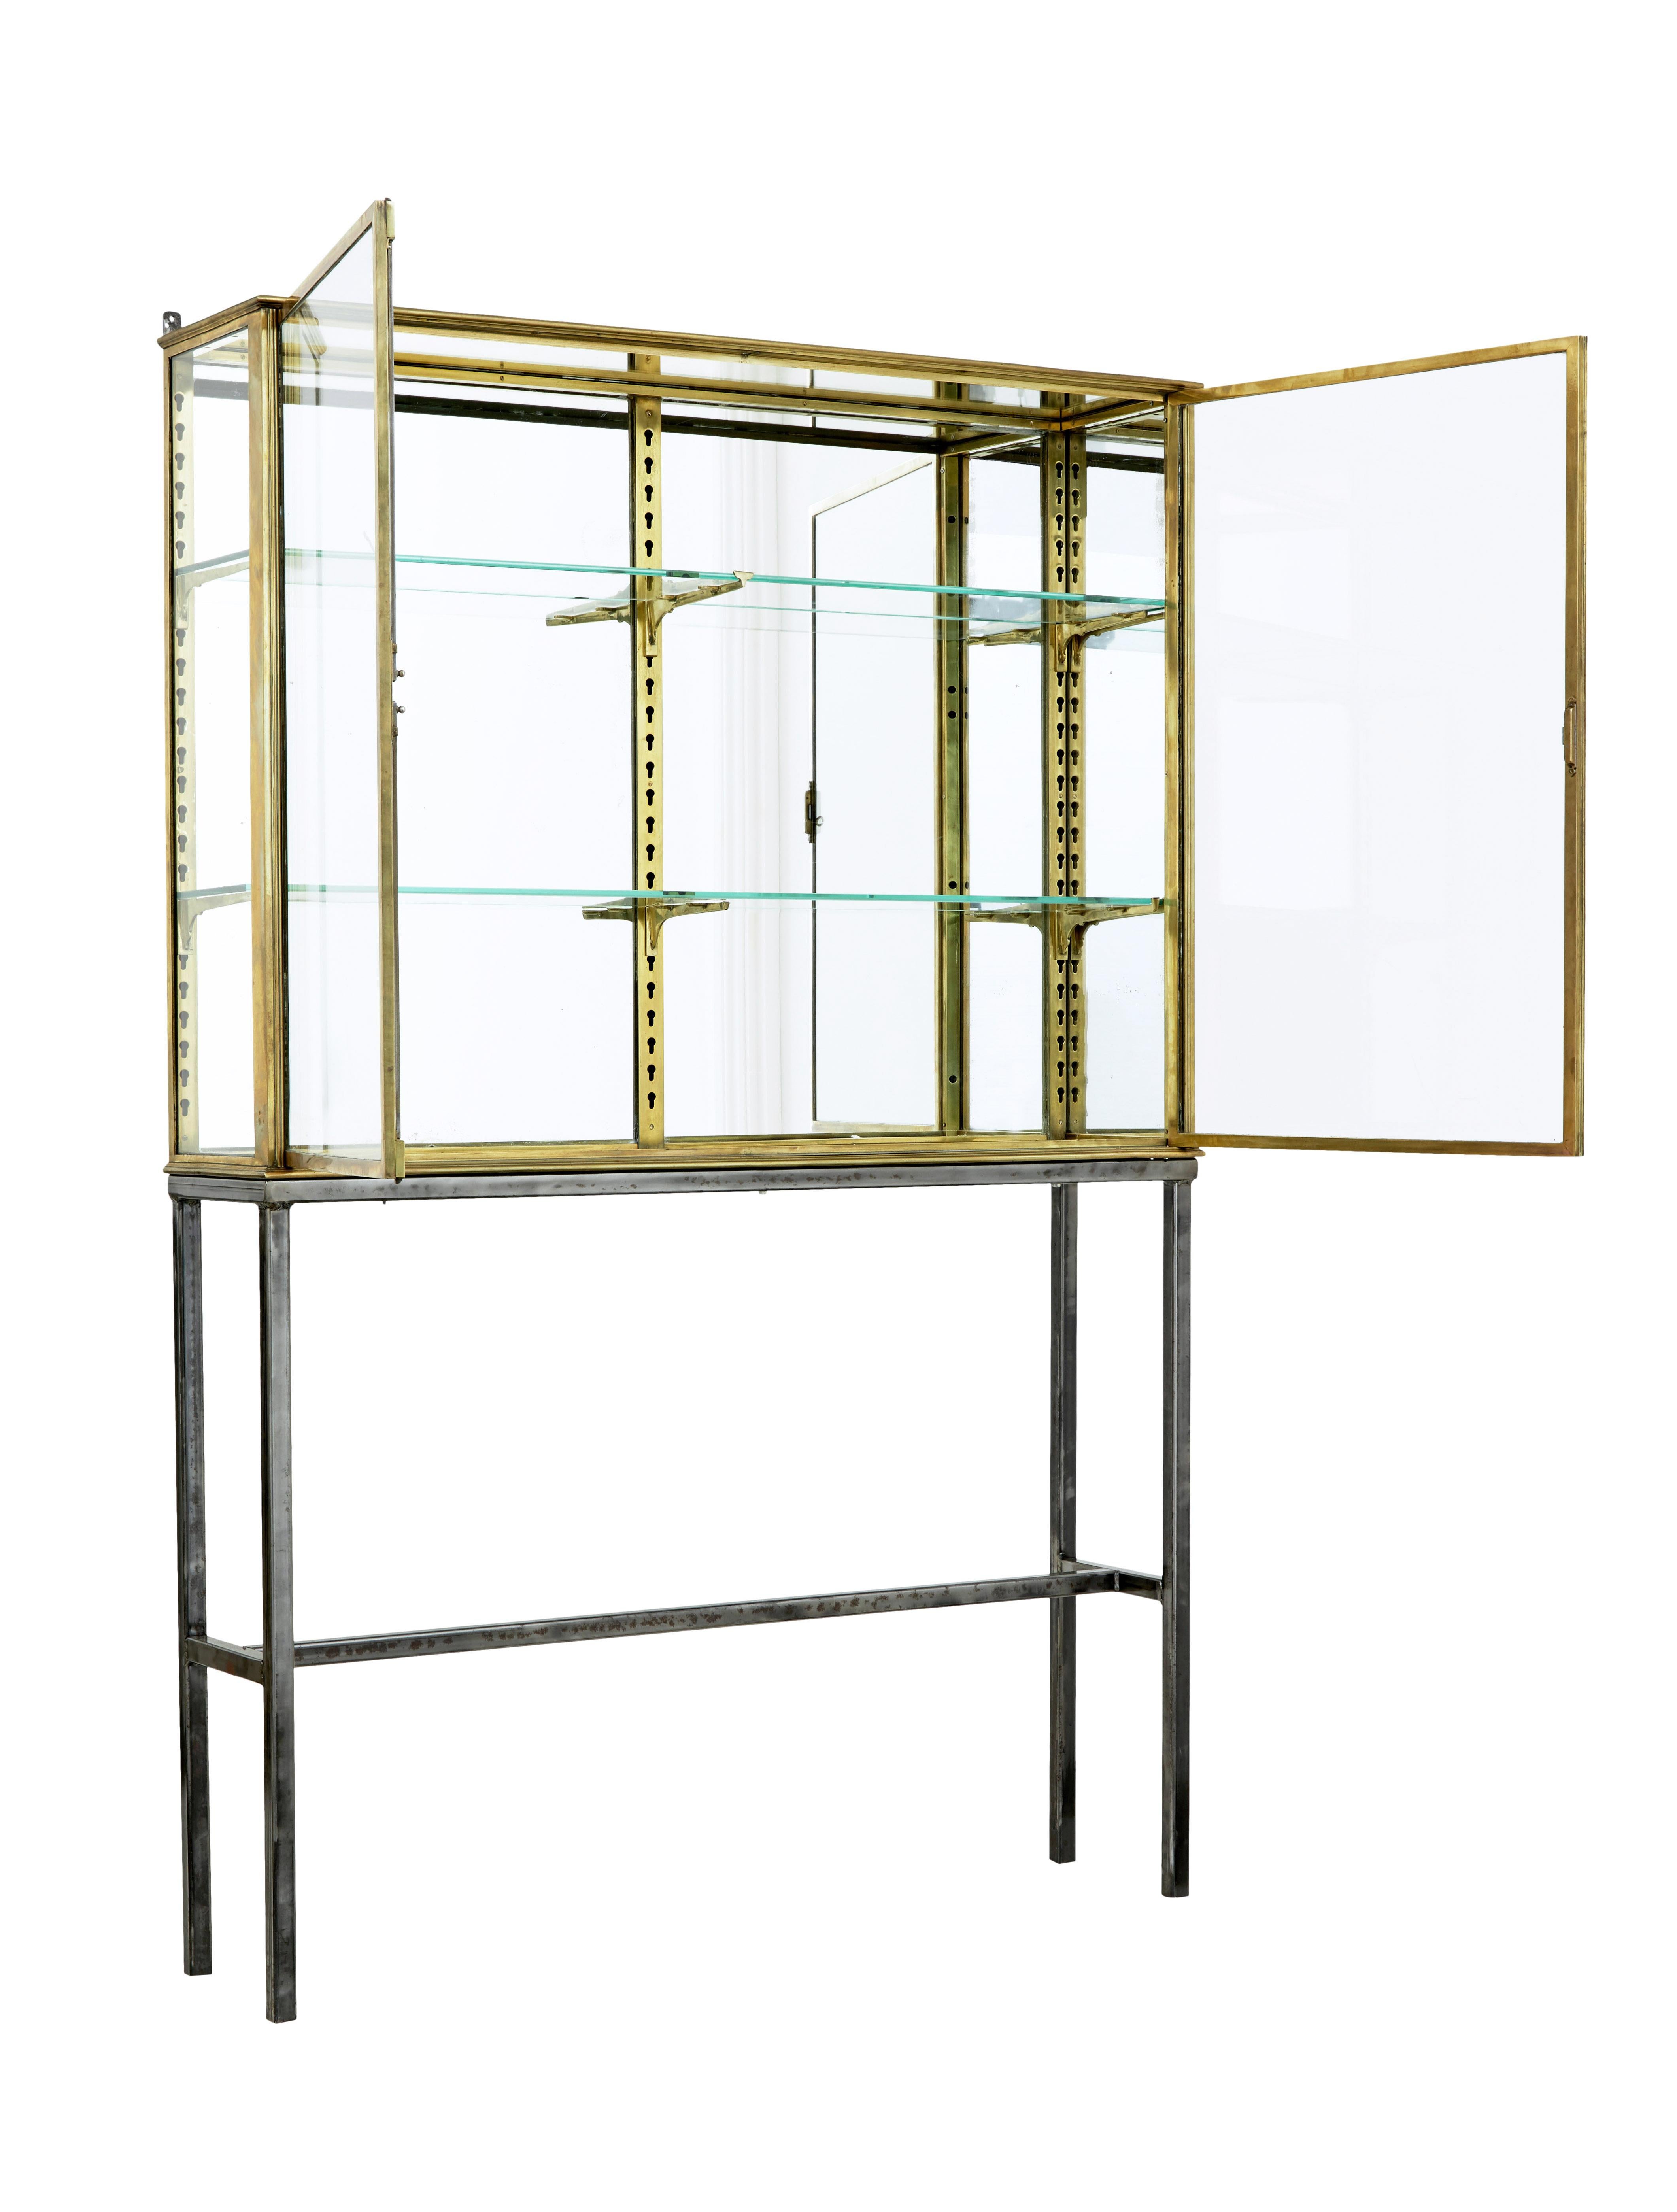 French 1920's brass glazed shop display cabinet by siegel circa 1920.

Fine piece of cabinet making by well known Parisian maker Siegel.  Solid brass frame glazed to the left and mirrored panel to the right.  Fitted with movable brackets to